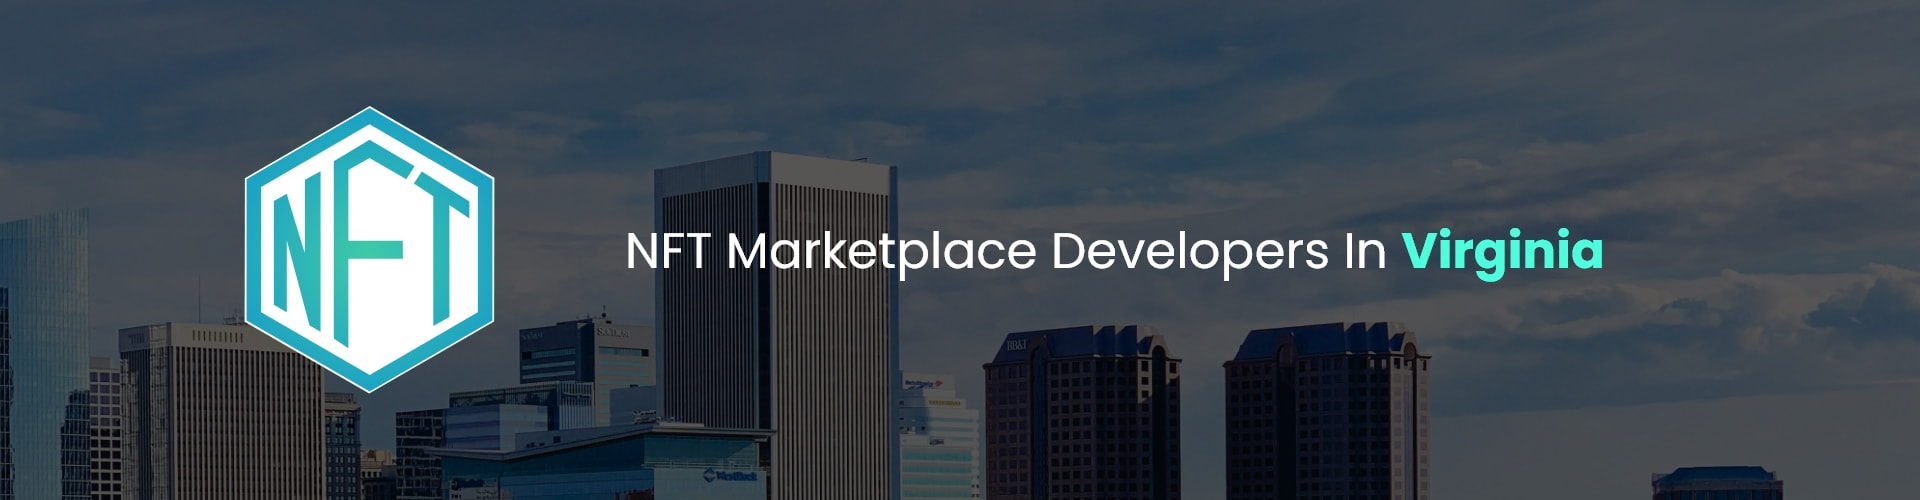 hire nft marketplace developers in virginia